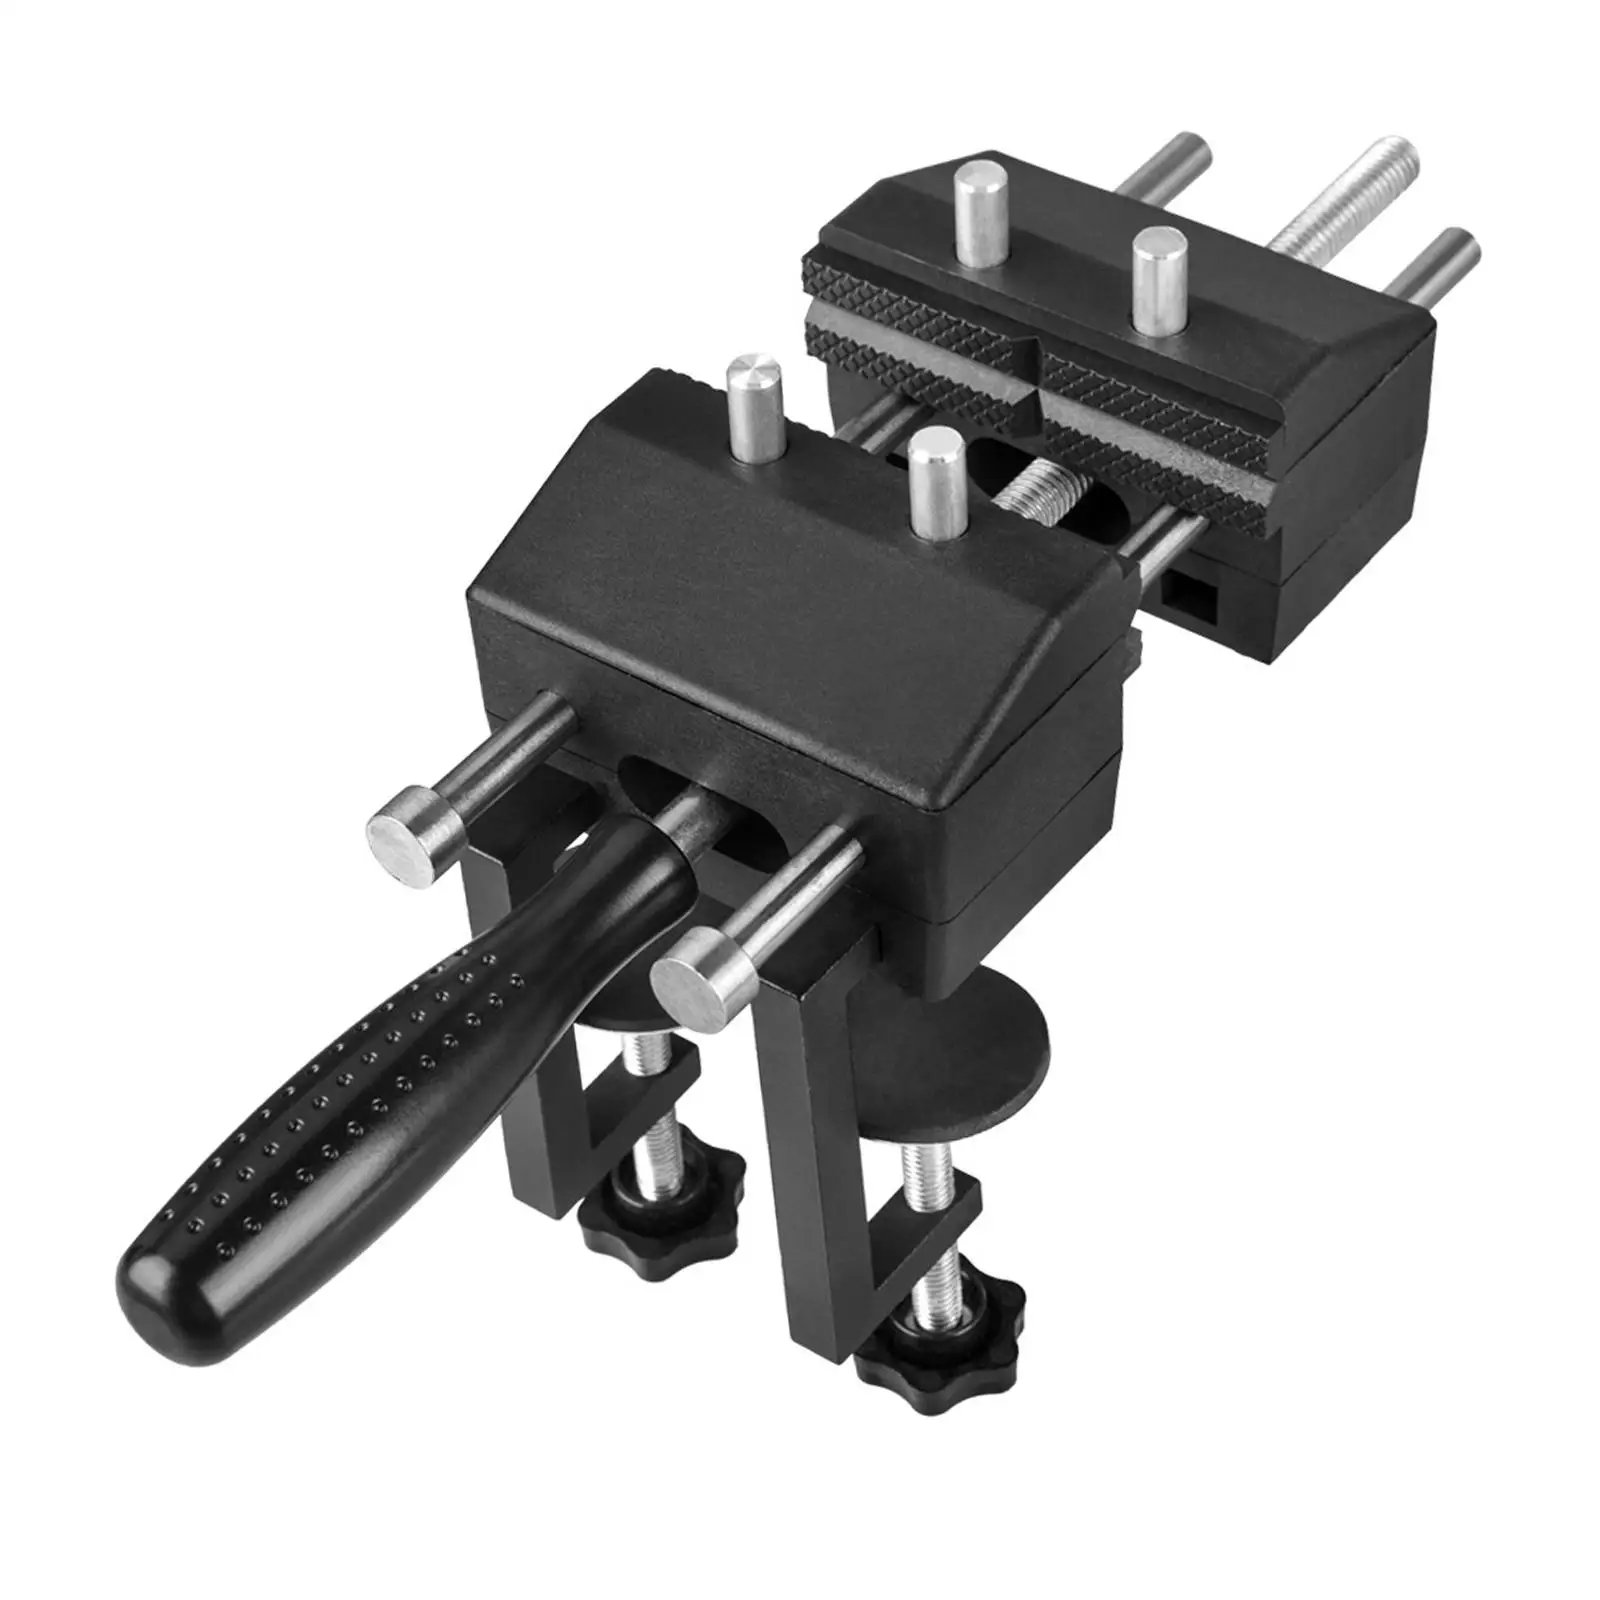 Bench Vise Clamp Quick Adjustment Metalworking Adjustable Table Vice Clamp